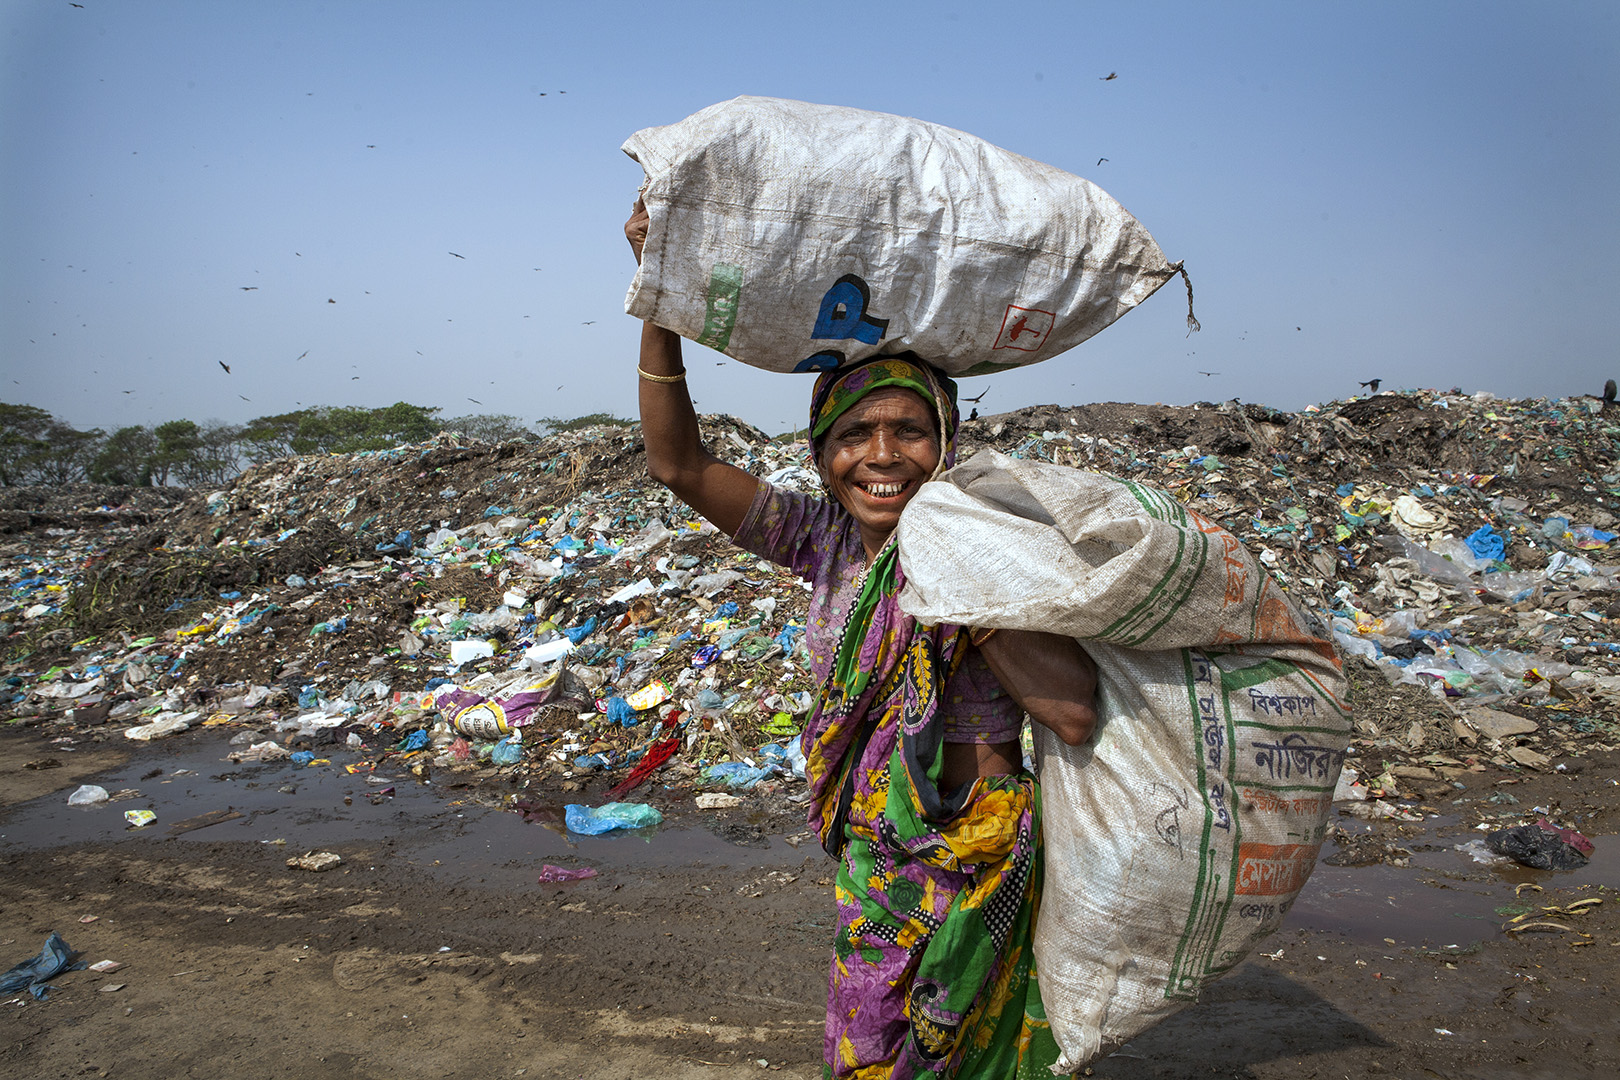 The women pick recyclables plastic materials to sell the Market for their livelihood in waste land, Sylhet, Bangladesh.